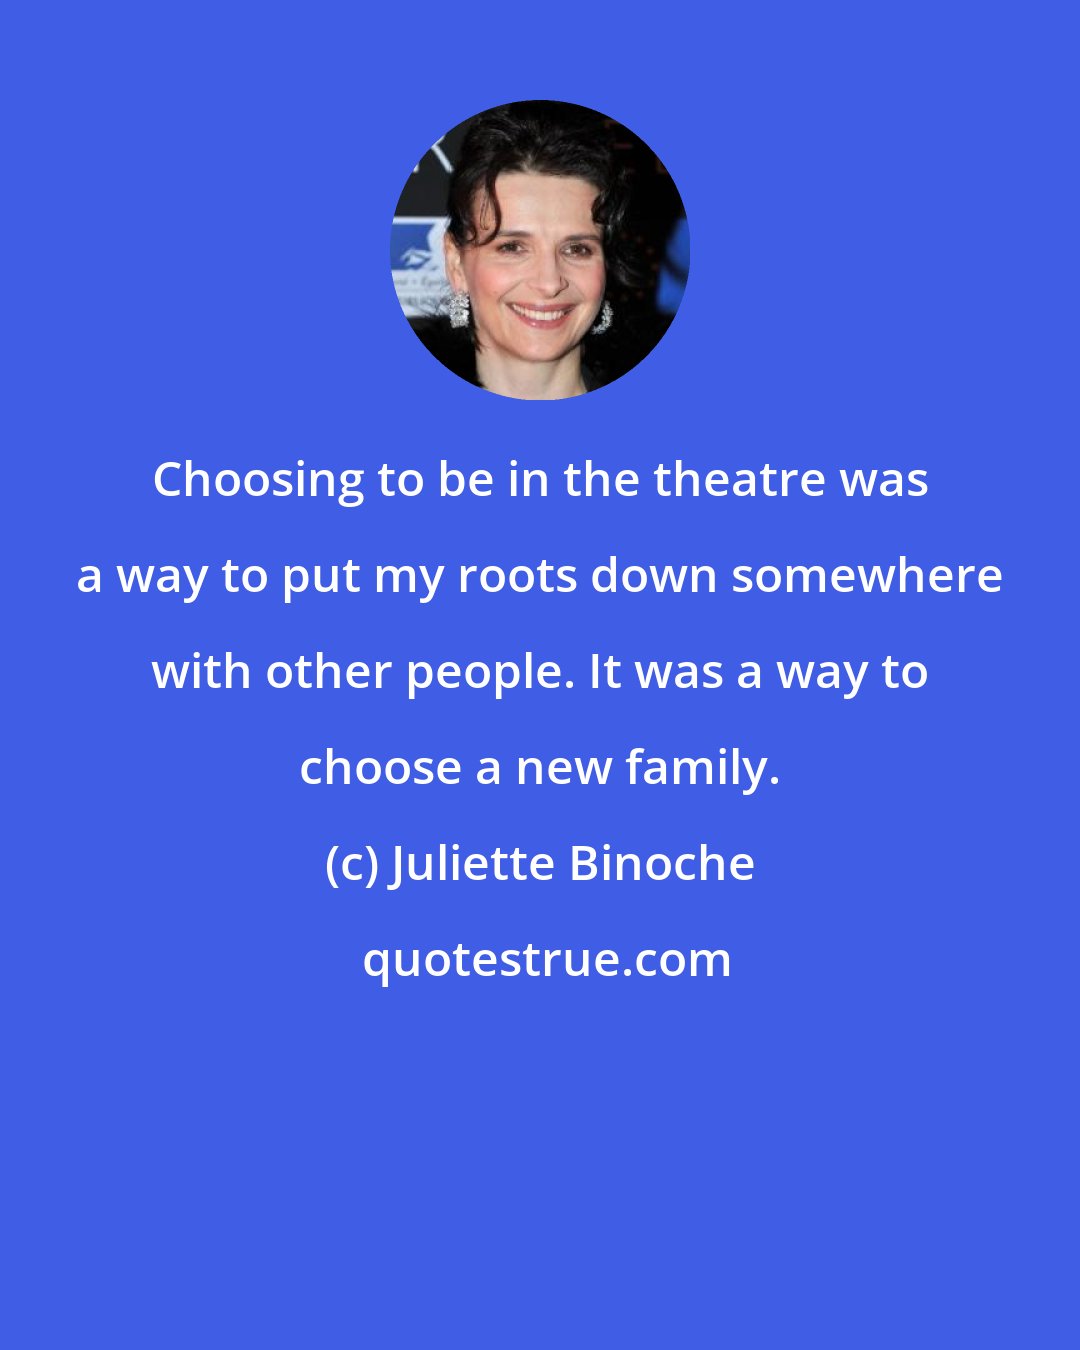 Juliette Binoche: Choosing to be in the theatre was a way to put my roots down somewhere with other people. It was a way to choose a new family.